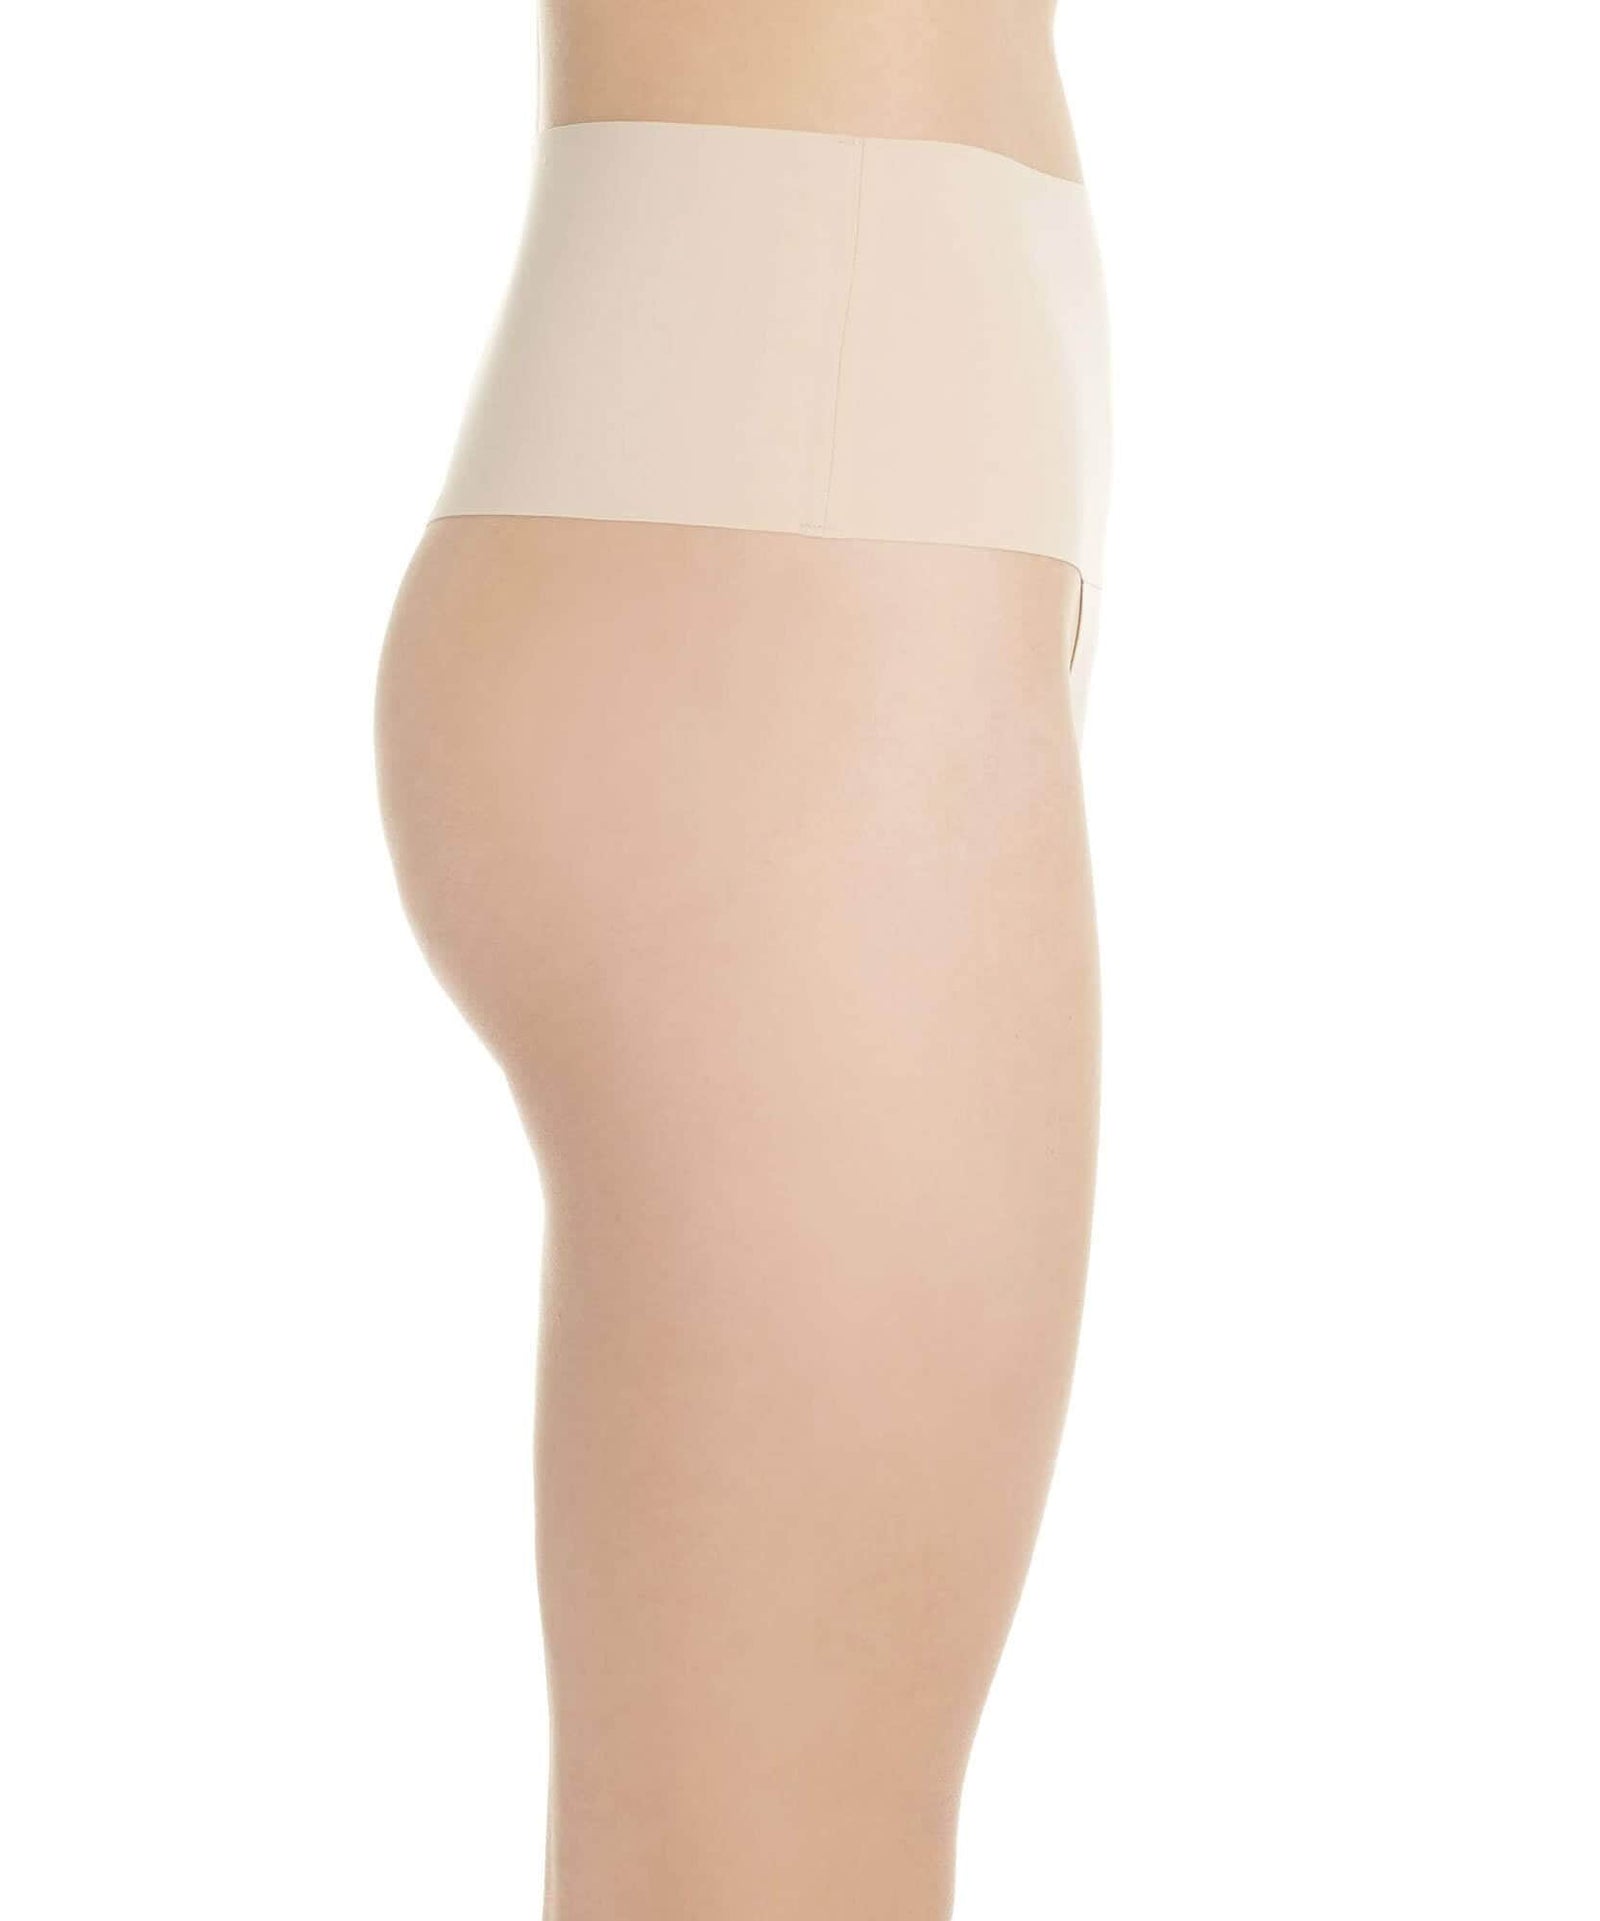 Undie-tectable Thong, Soft Nude